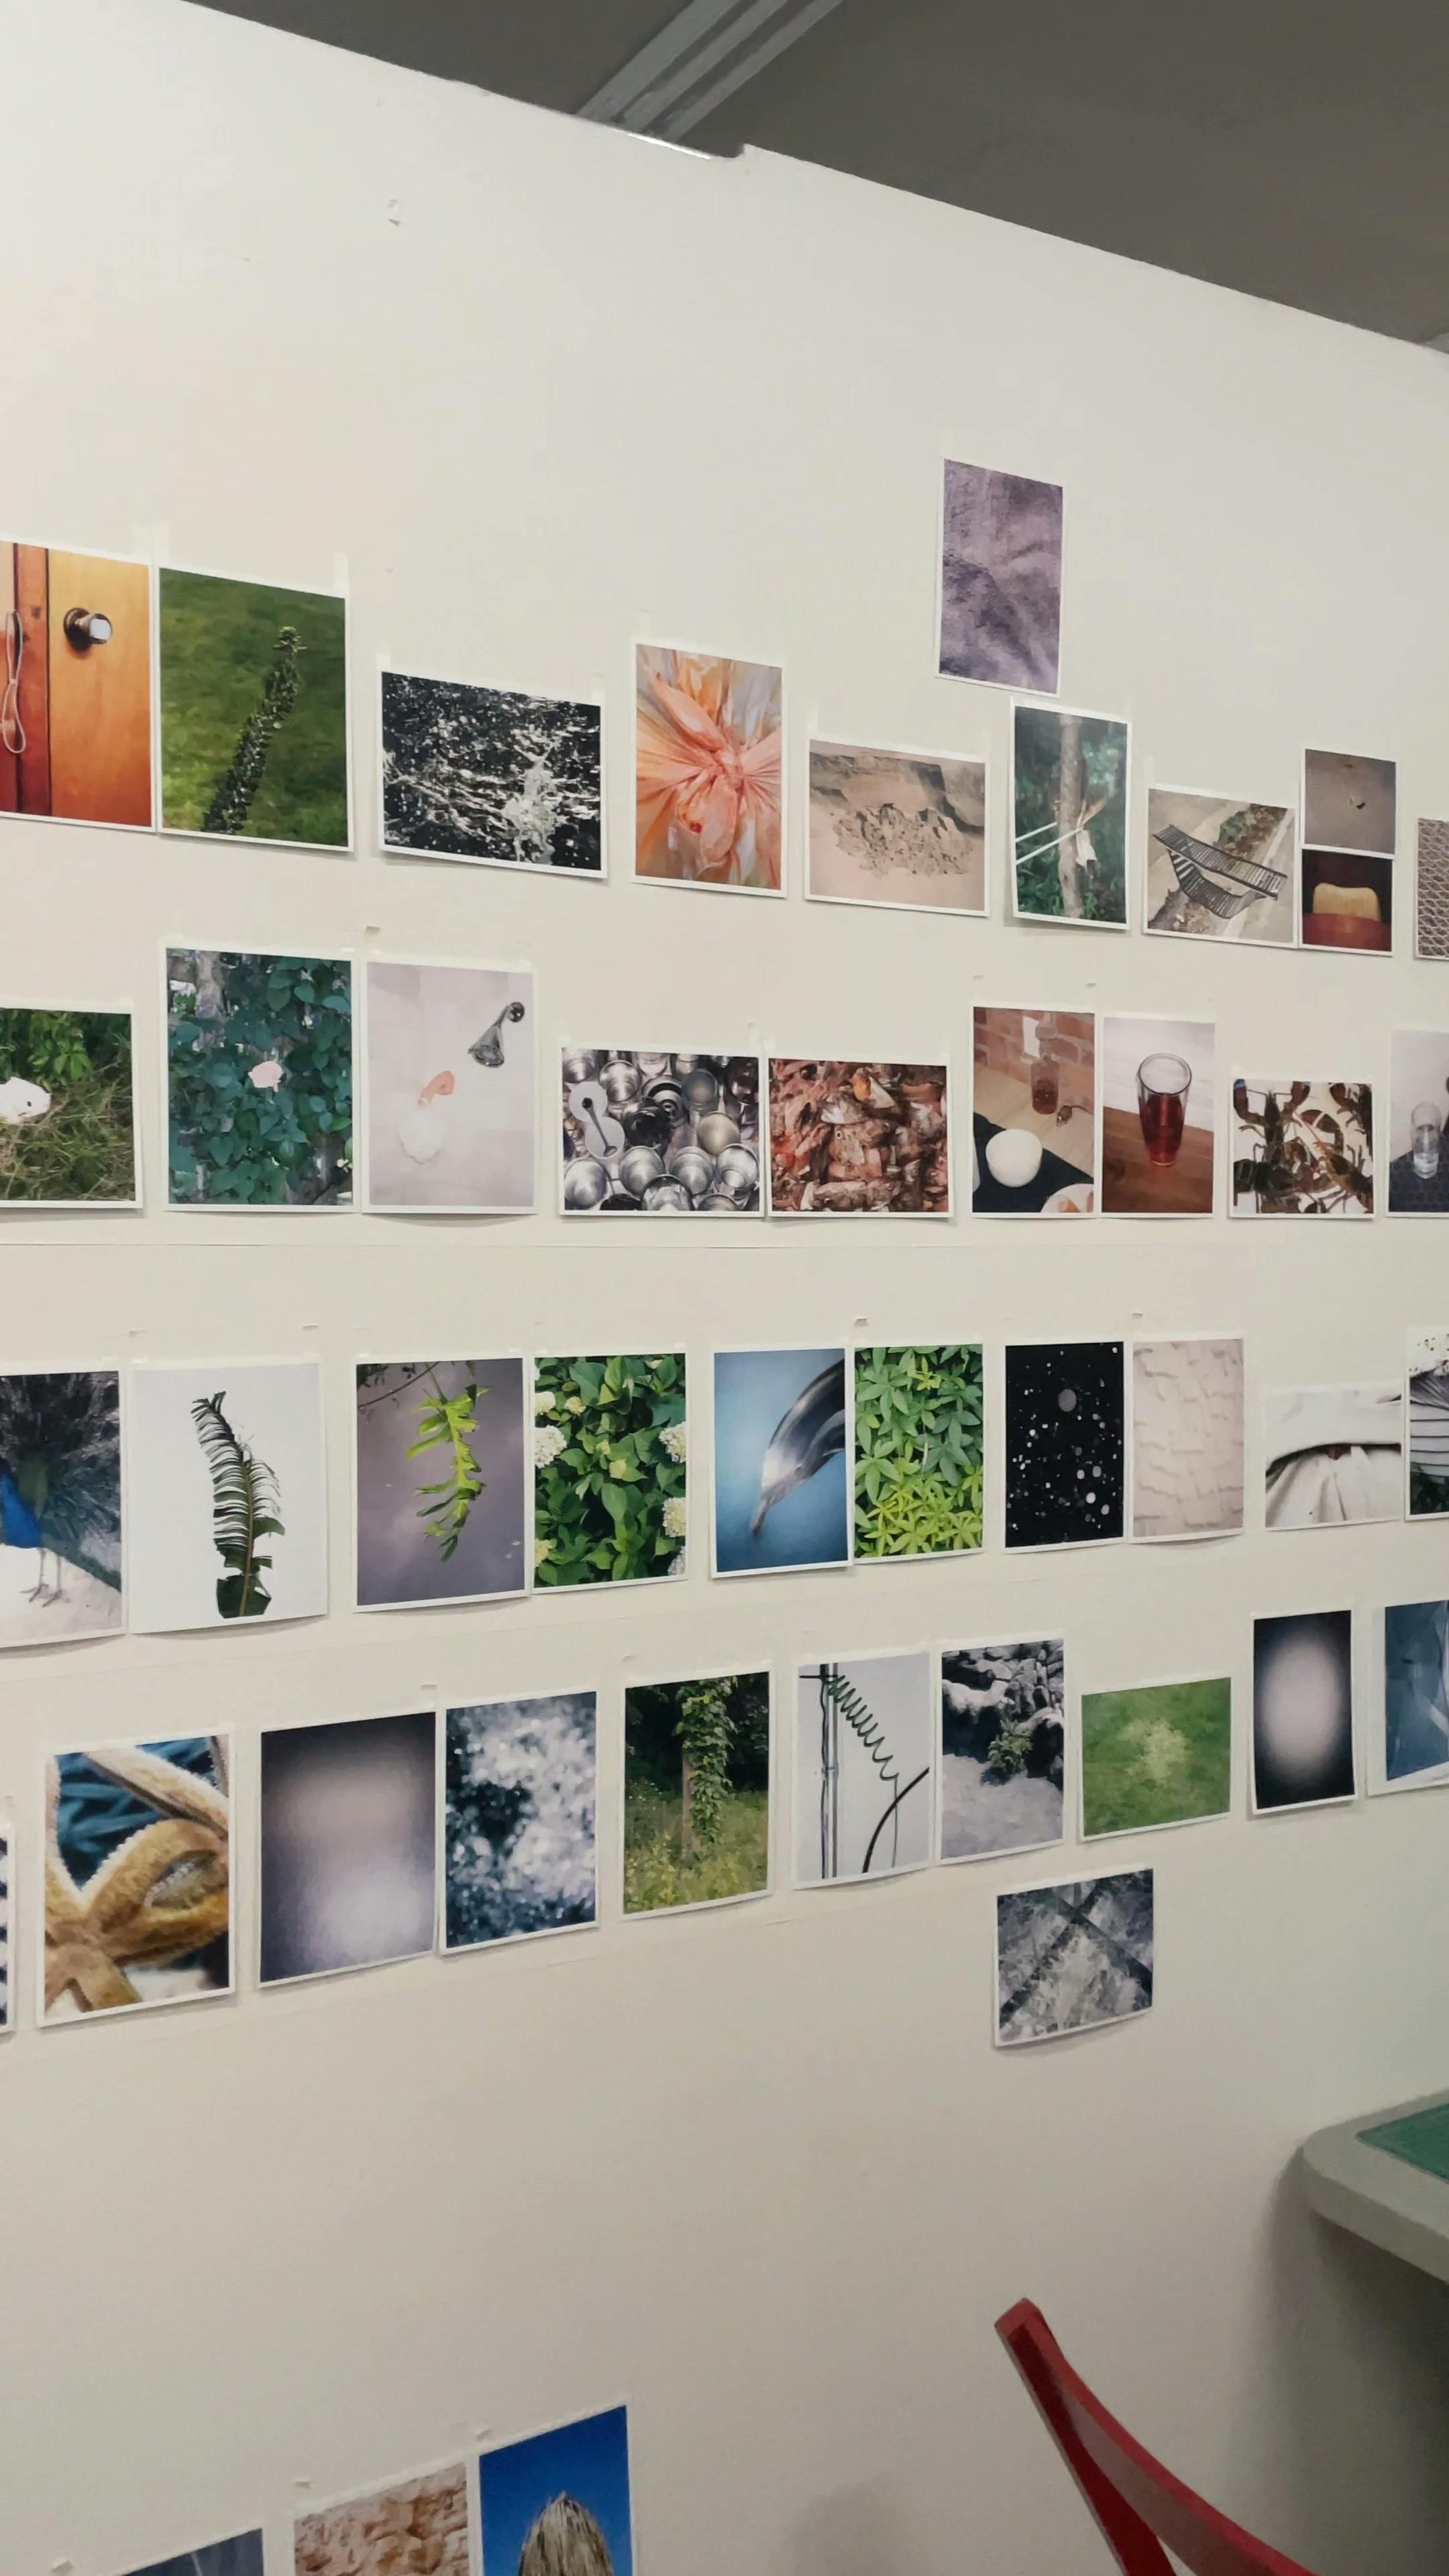 Rows of small photographs by artist Ryan James MacFarland on a white wall in his studio.